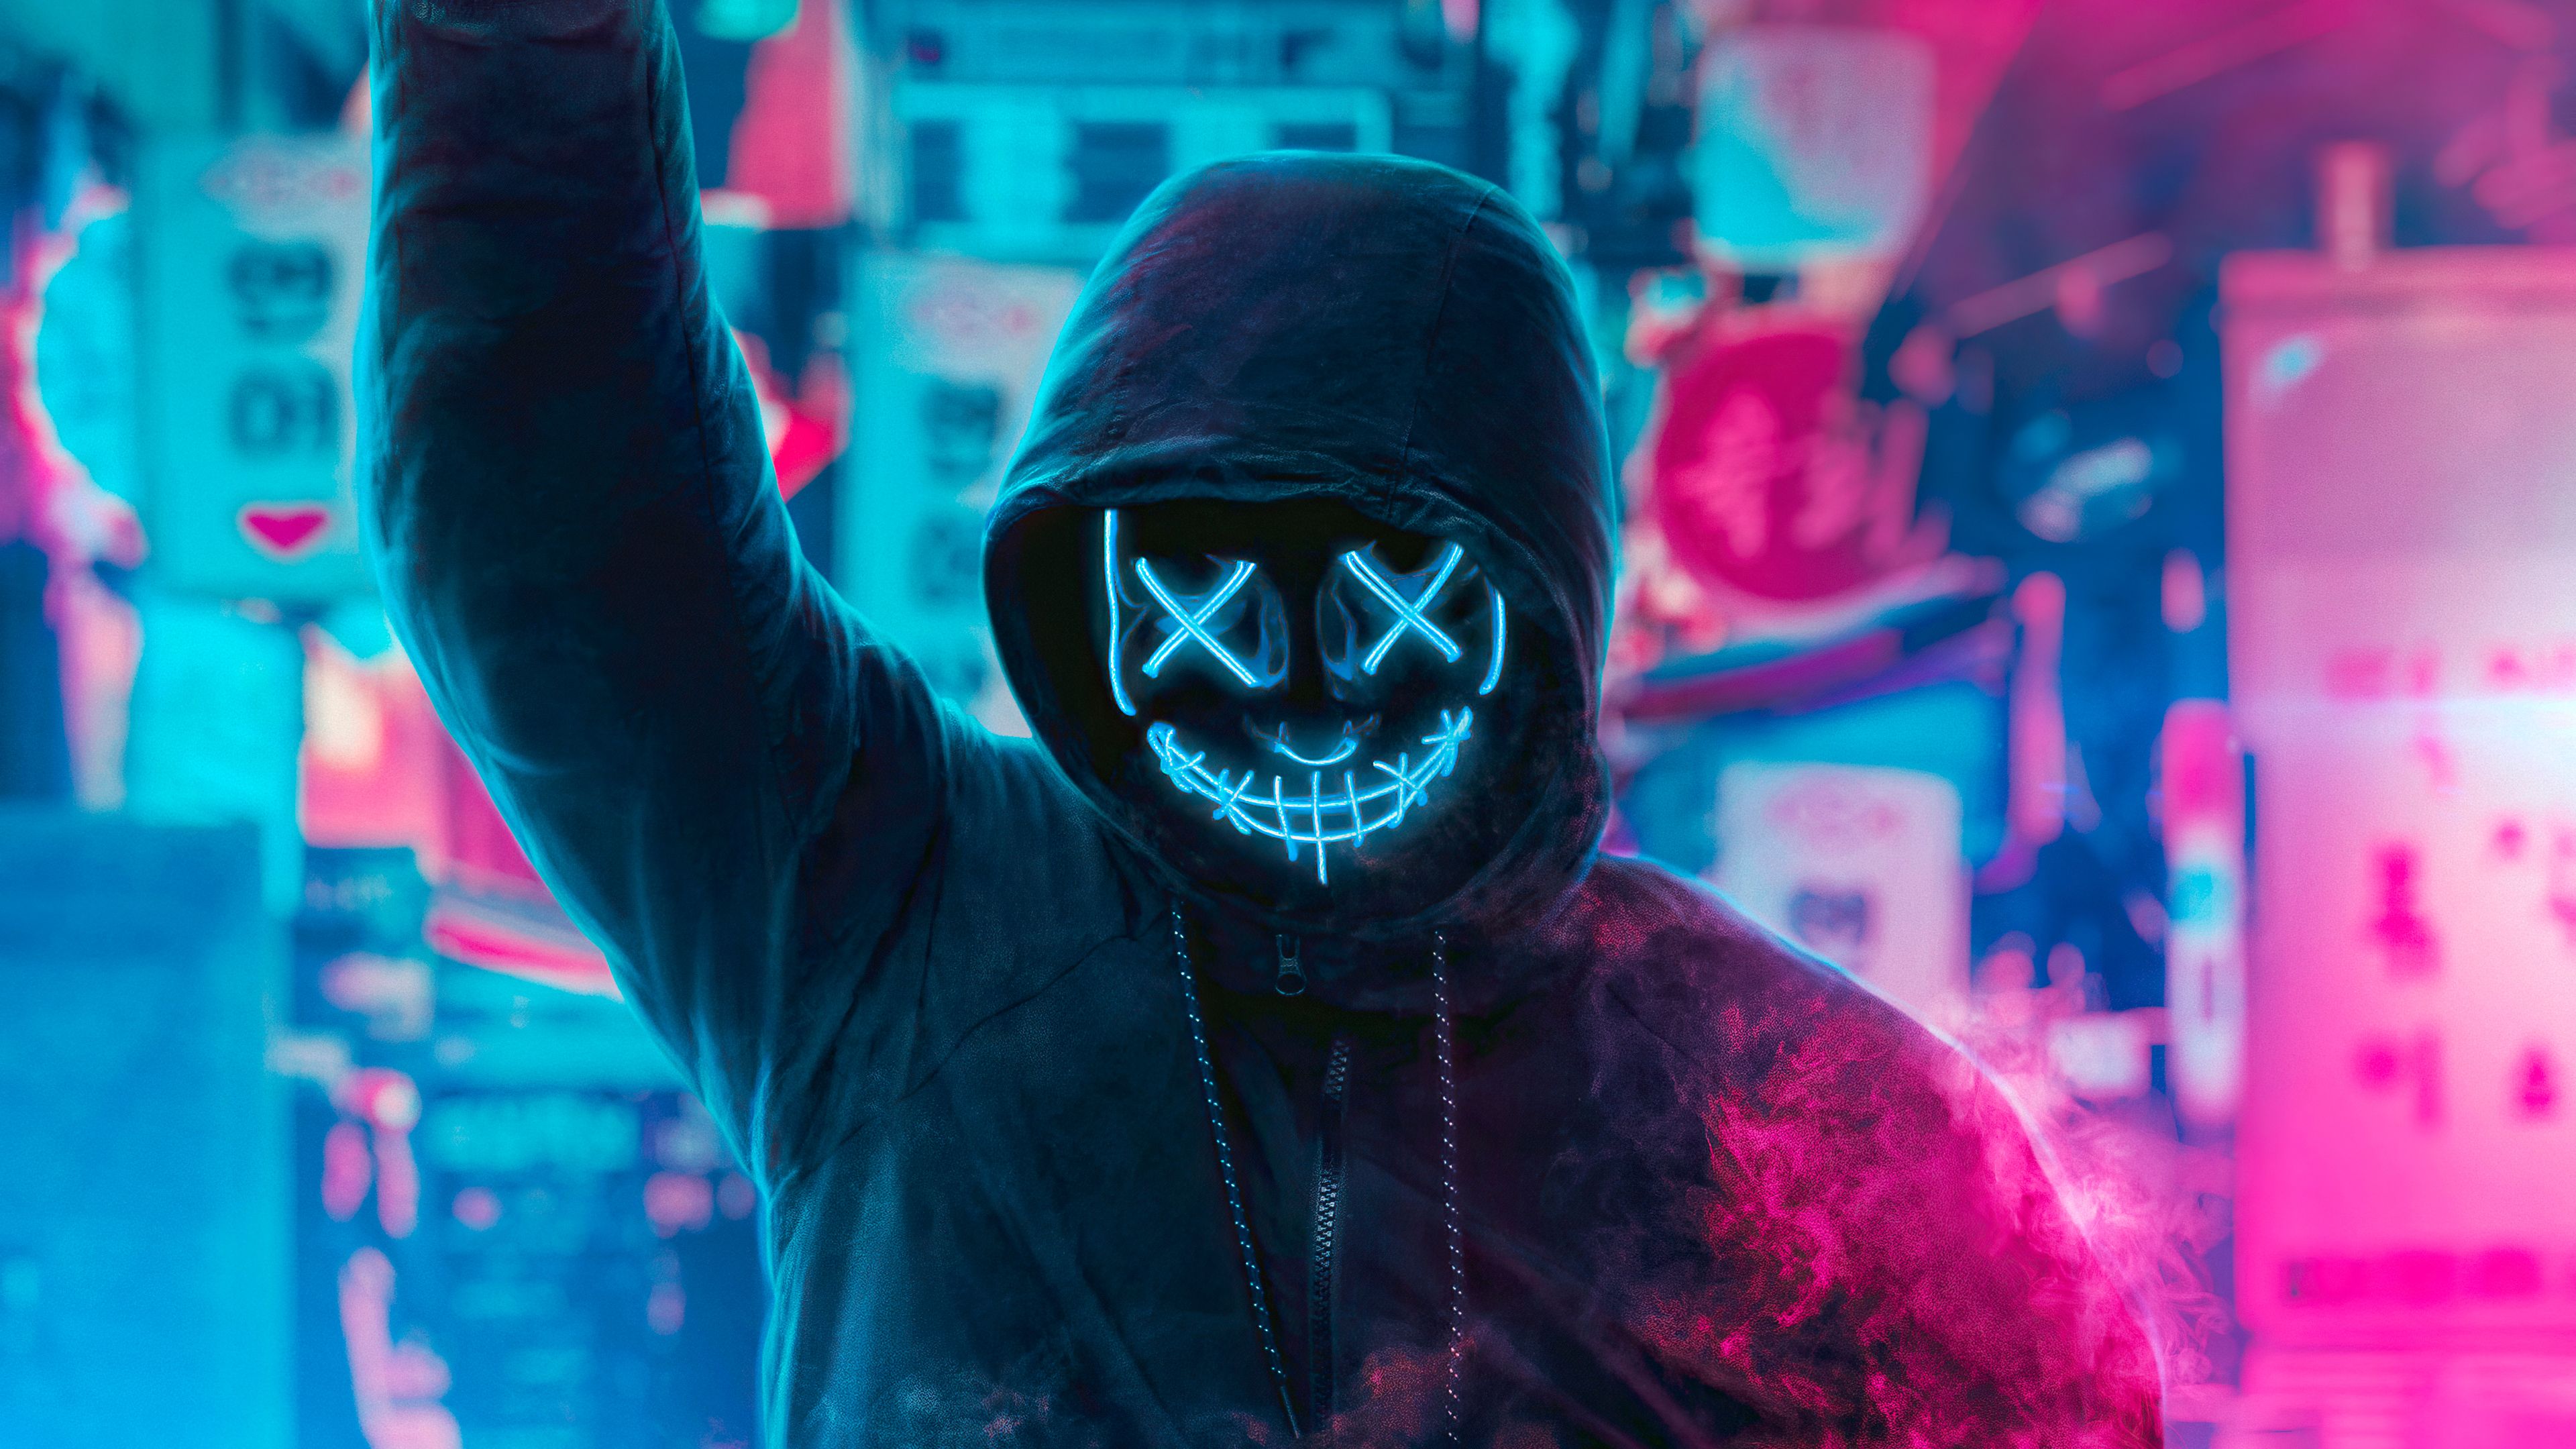 Mask Guy Neon Man With Smoke Bomb 4k, HD Photography, 4k Wallpaper, Image, Background, Photo and Picture